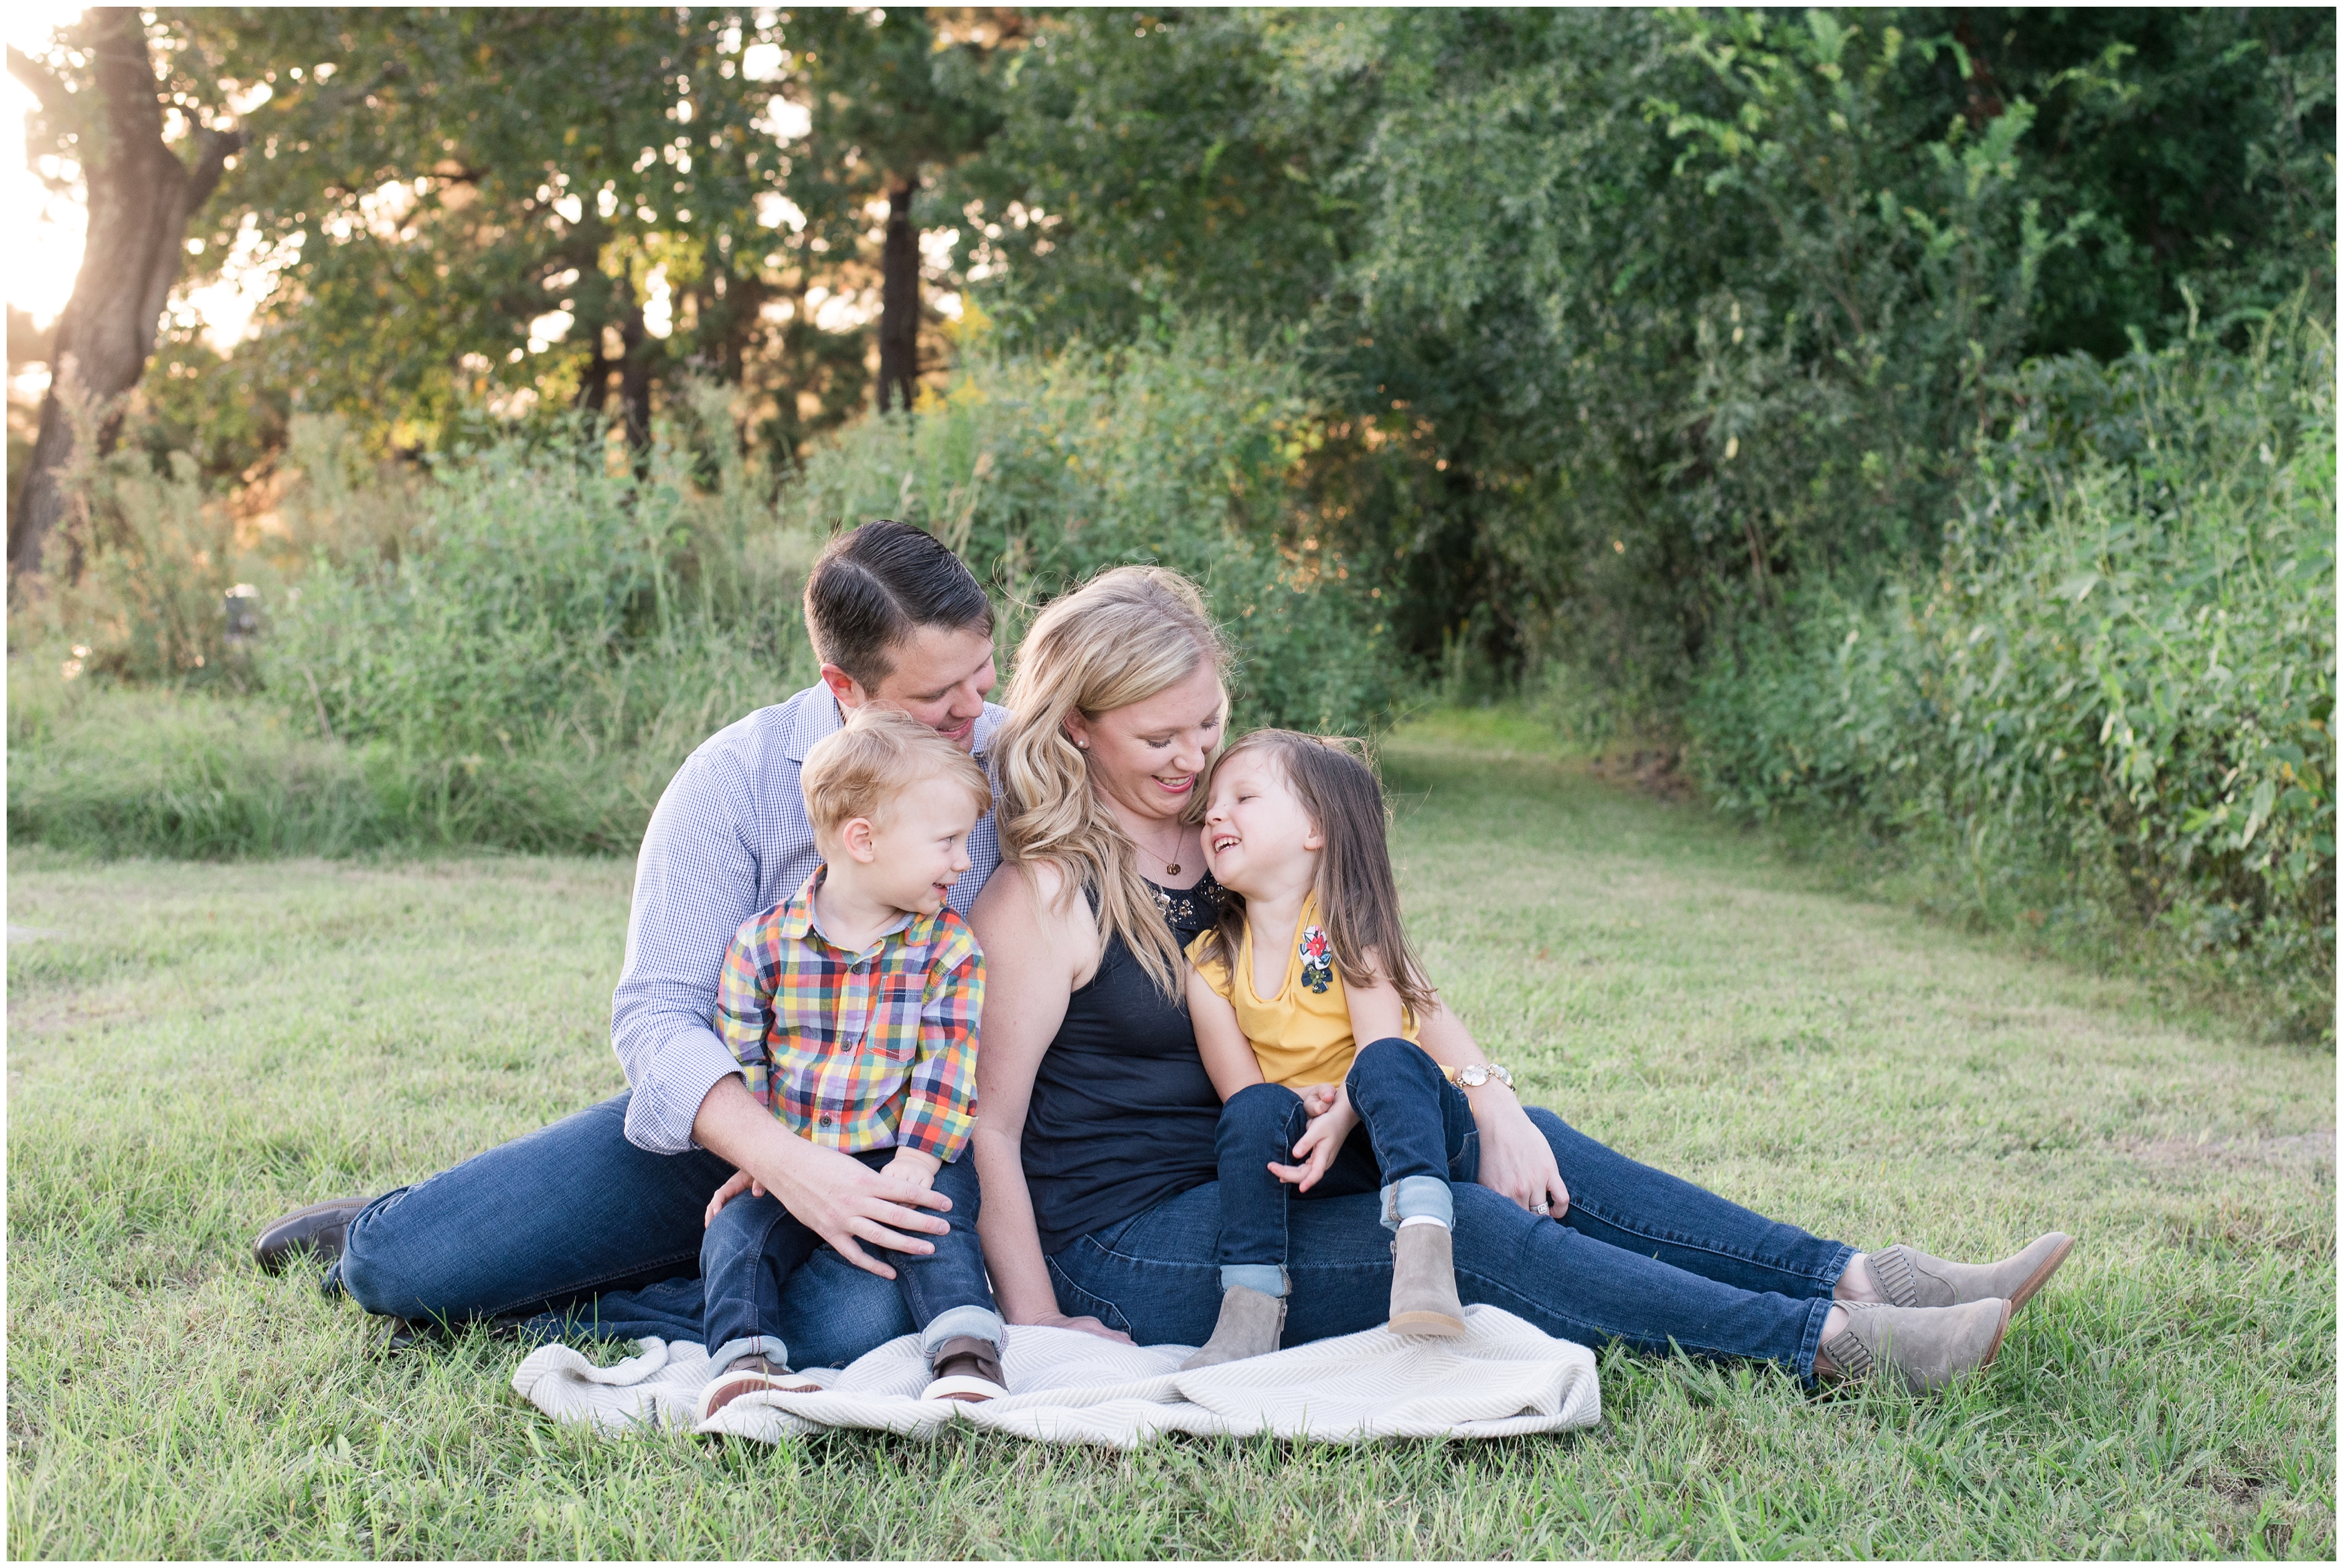 Kingwood photographer's fall mini sessions with family of four